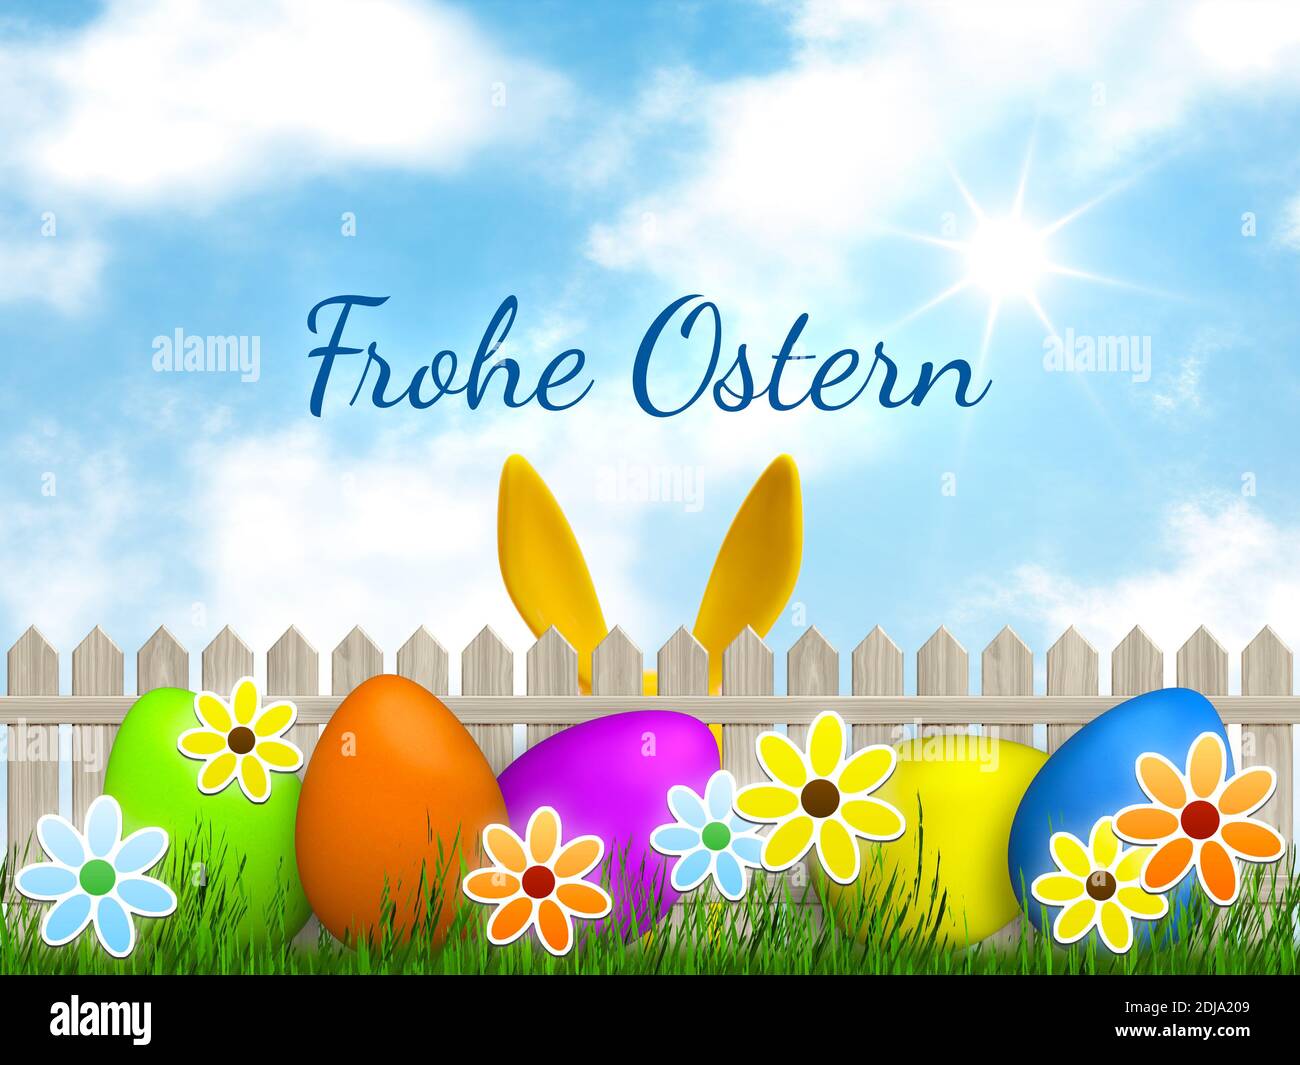 Illustration of a easter graphic with happy easter in german language Stock Photo